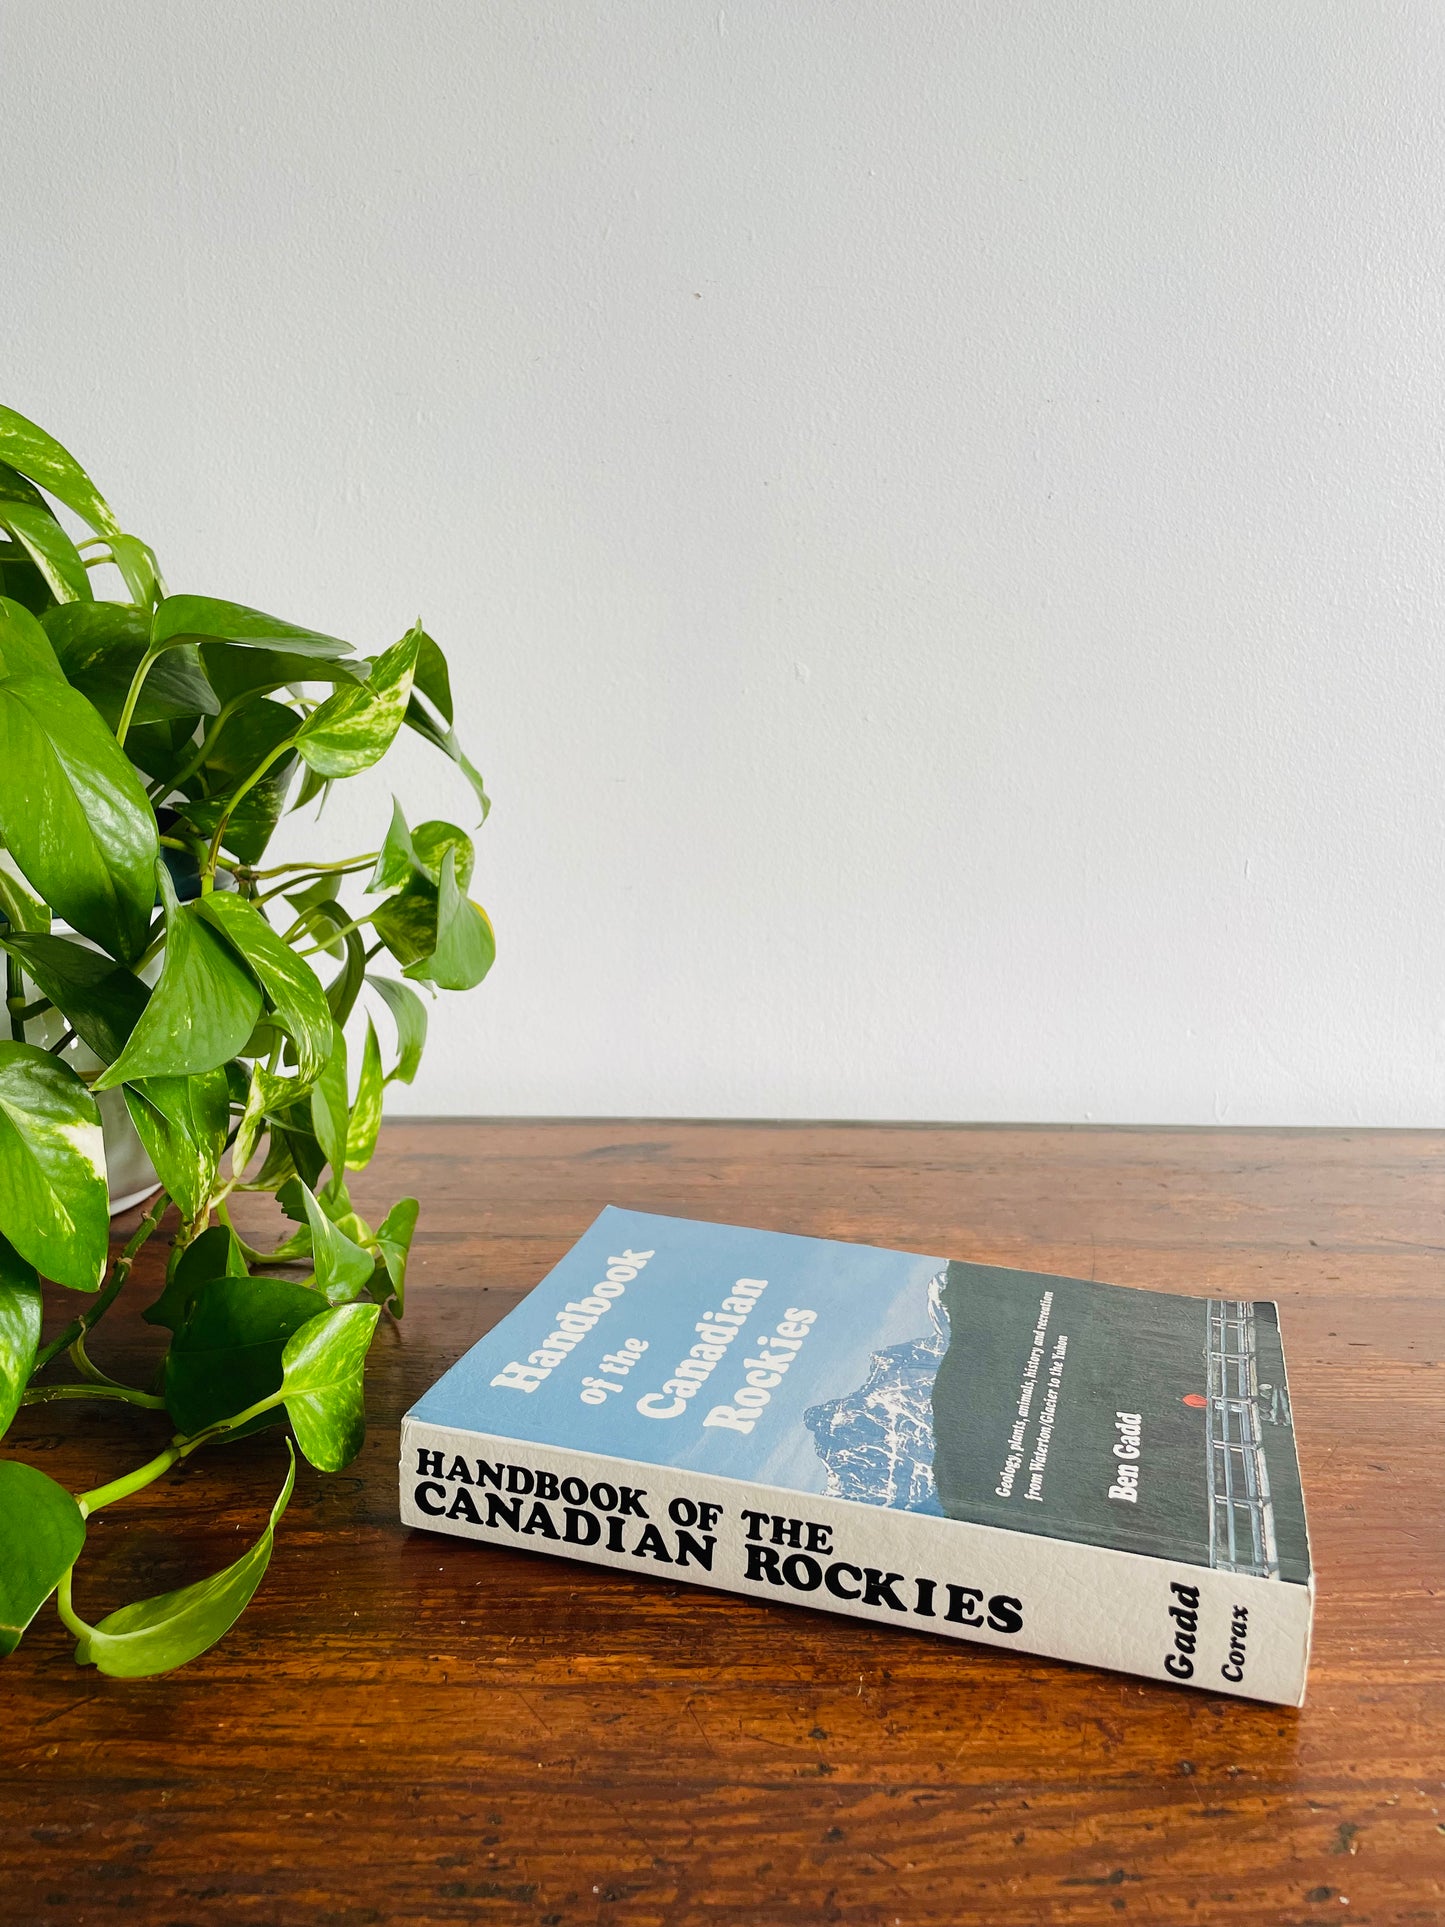 Handbook of the Canadian Rockies Book by Ben Gadd - Geology, Plants, Animals, History & Recreation from Watertown/Glacier to the Yukon (1986)